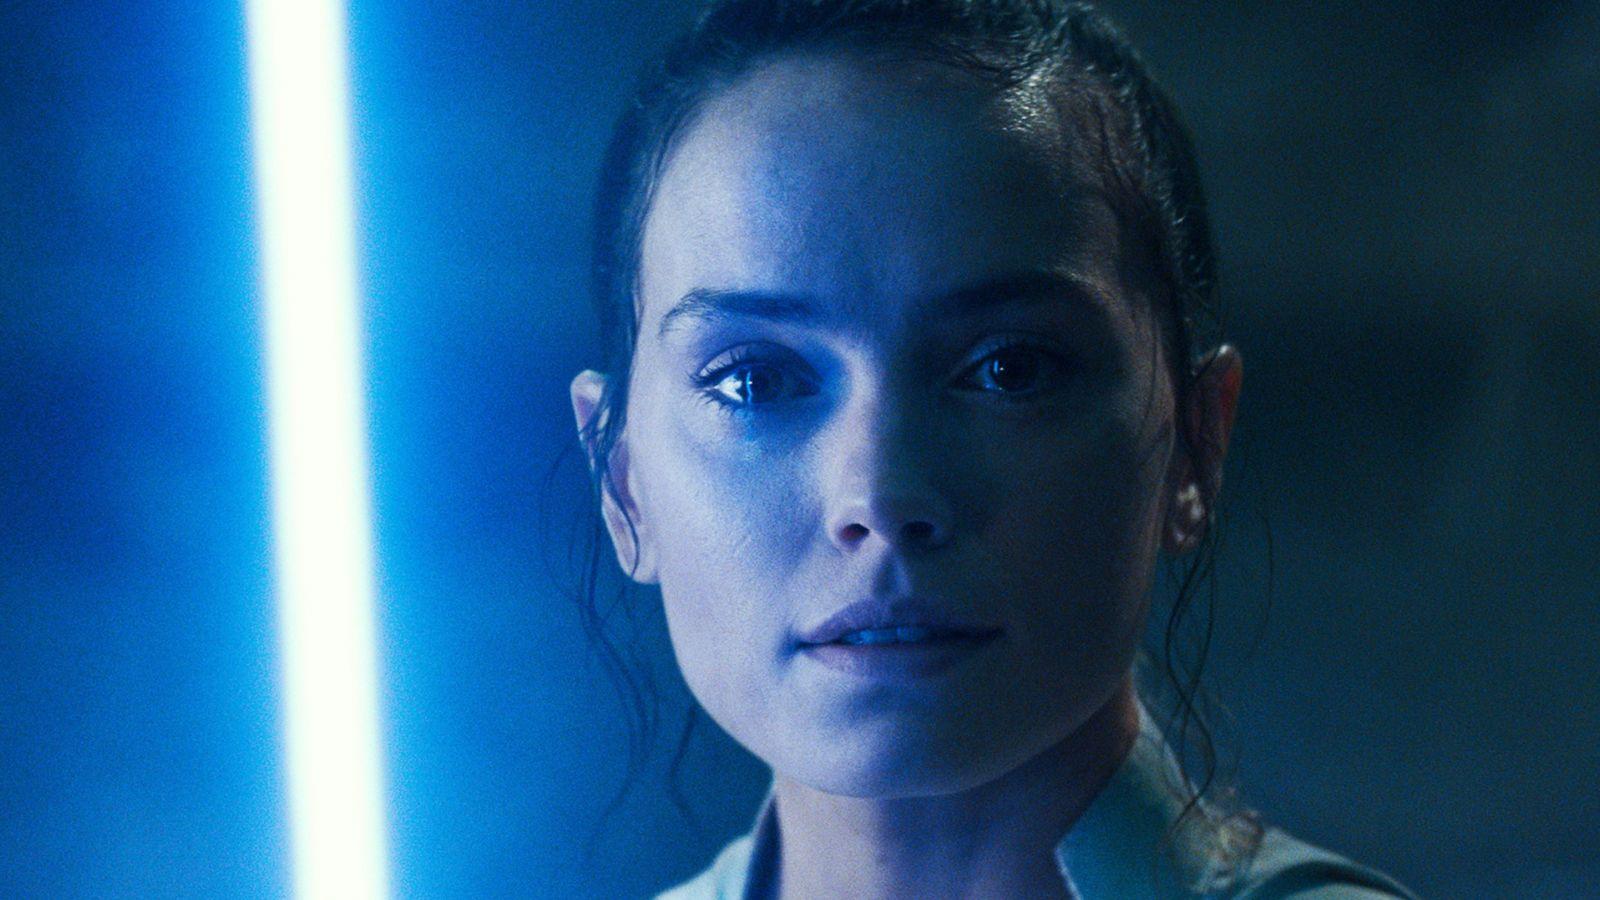 Daisy Ridley as Rey Skywalker in Star Wars The Force Awakens. The left side of her face is lit by blue lightsaber light, and she has tears in her eyes.